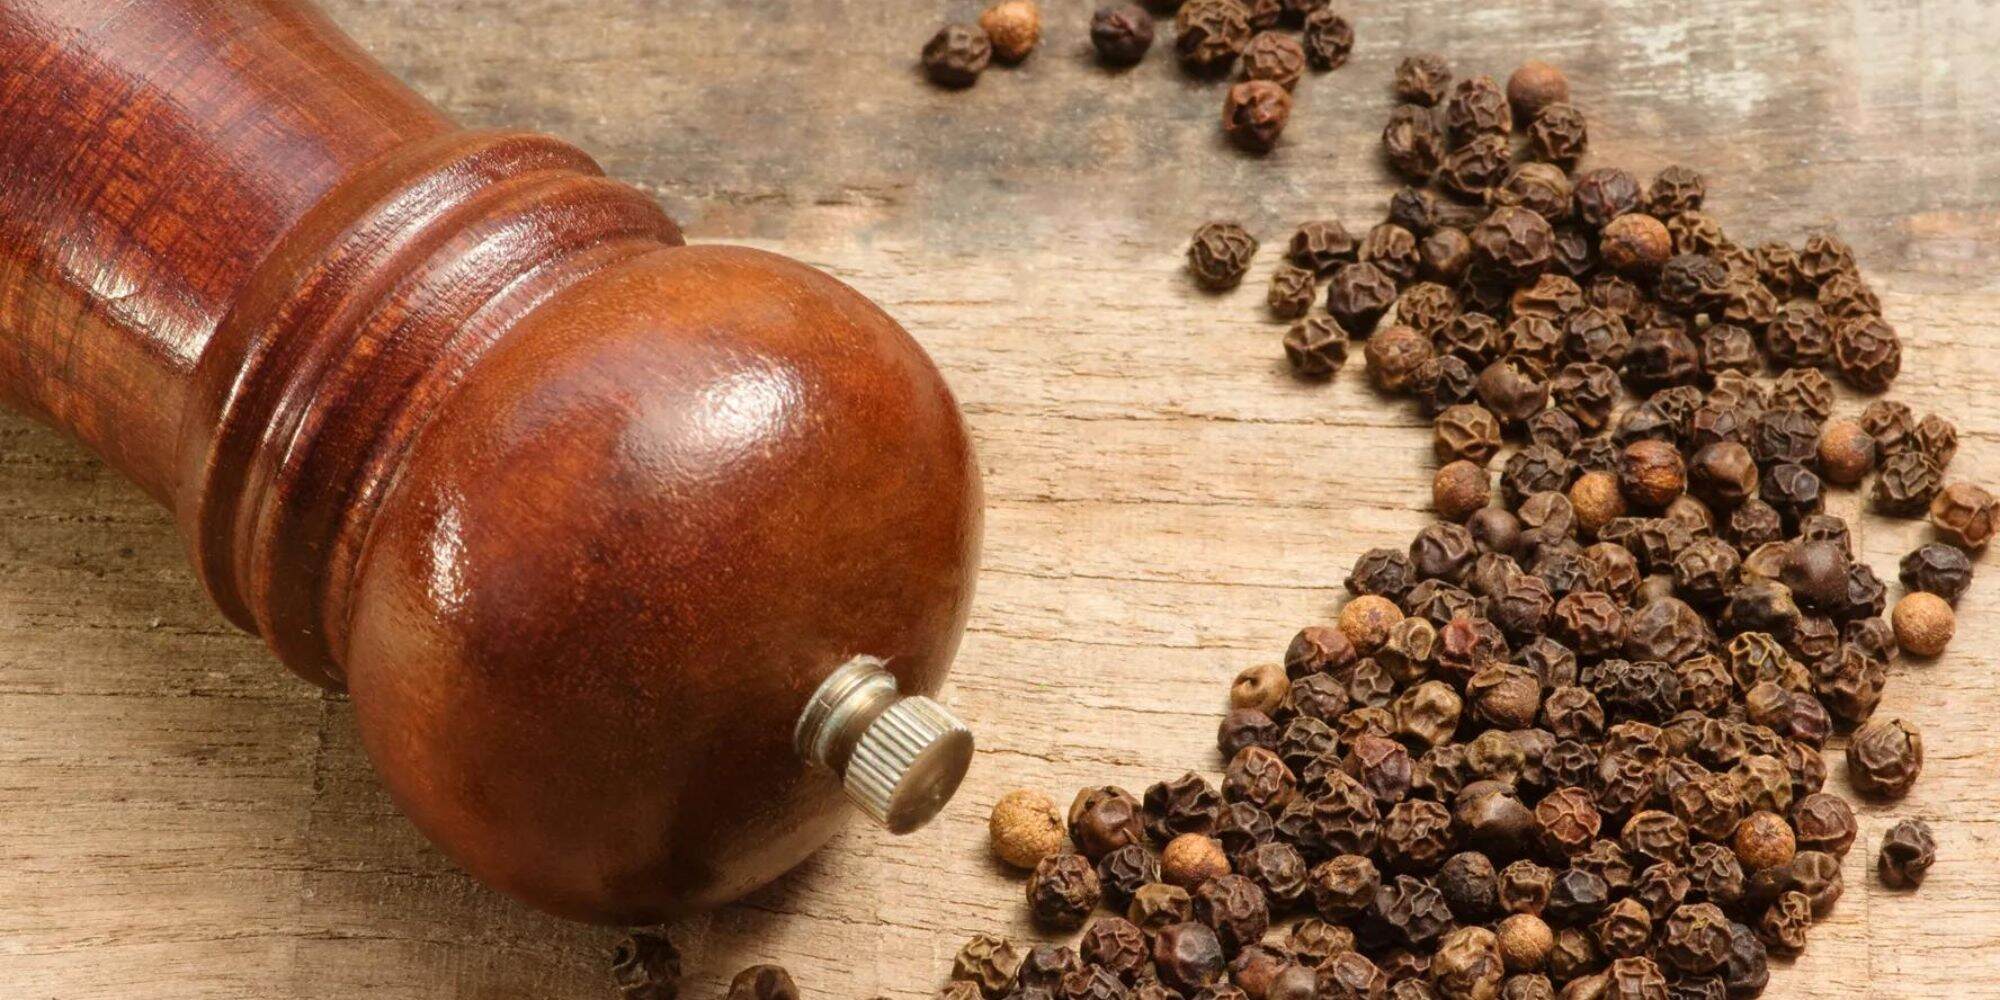 How To Grind Pepper Without Grinder 1704339533 